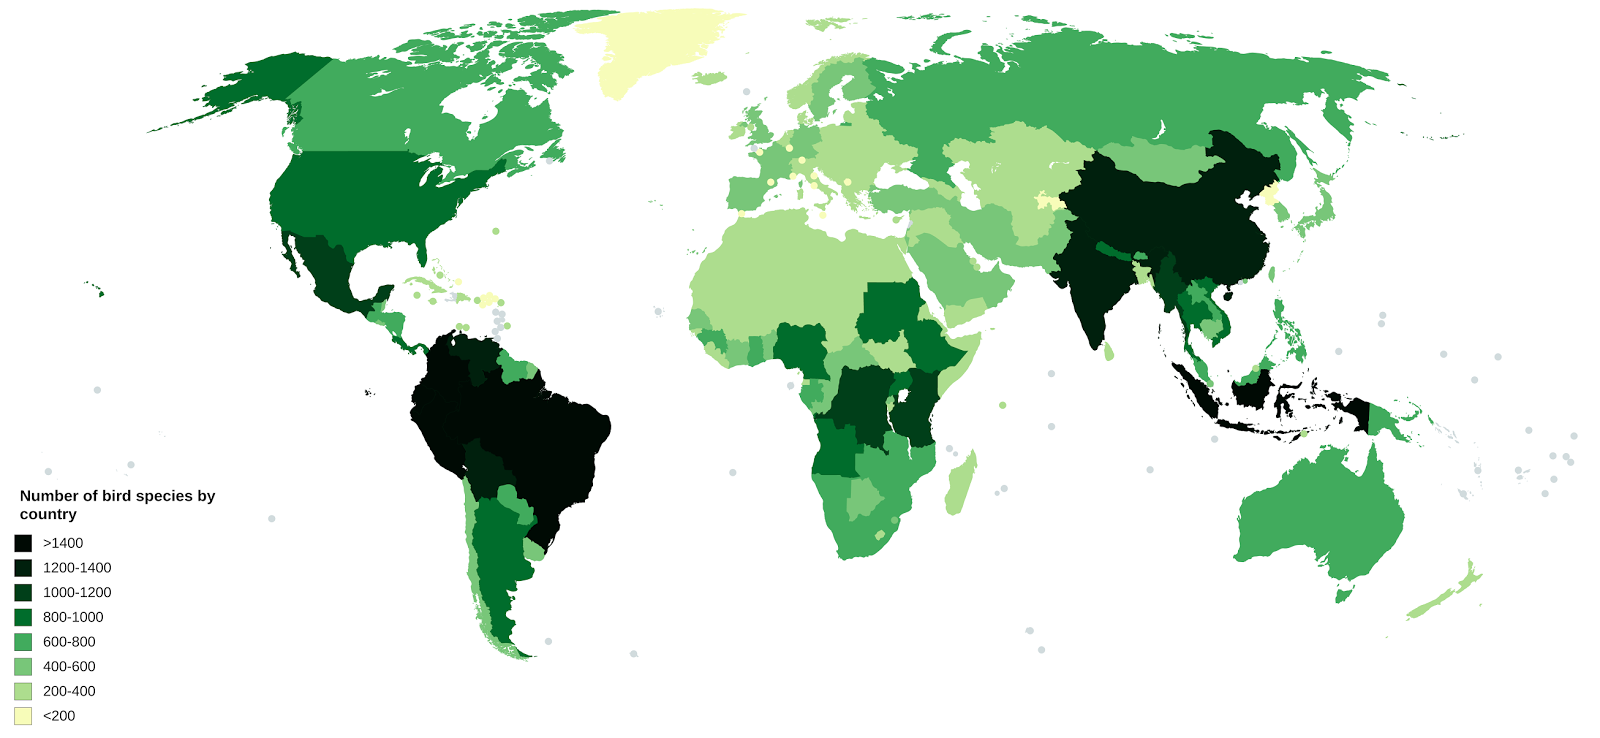 Number of species of birds by country